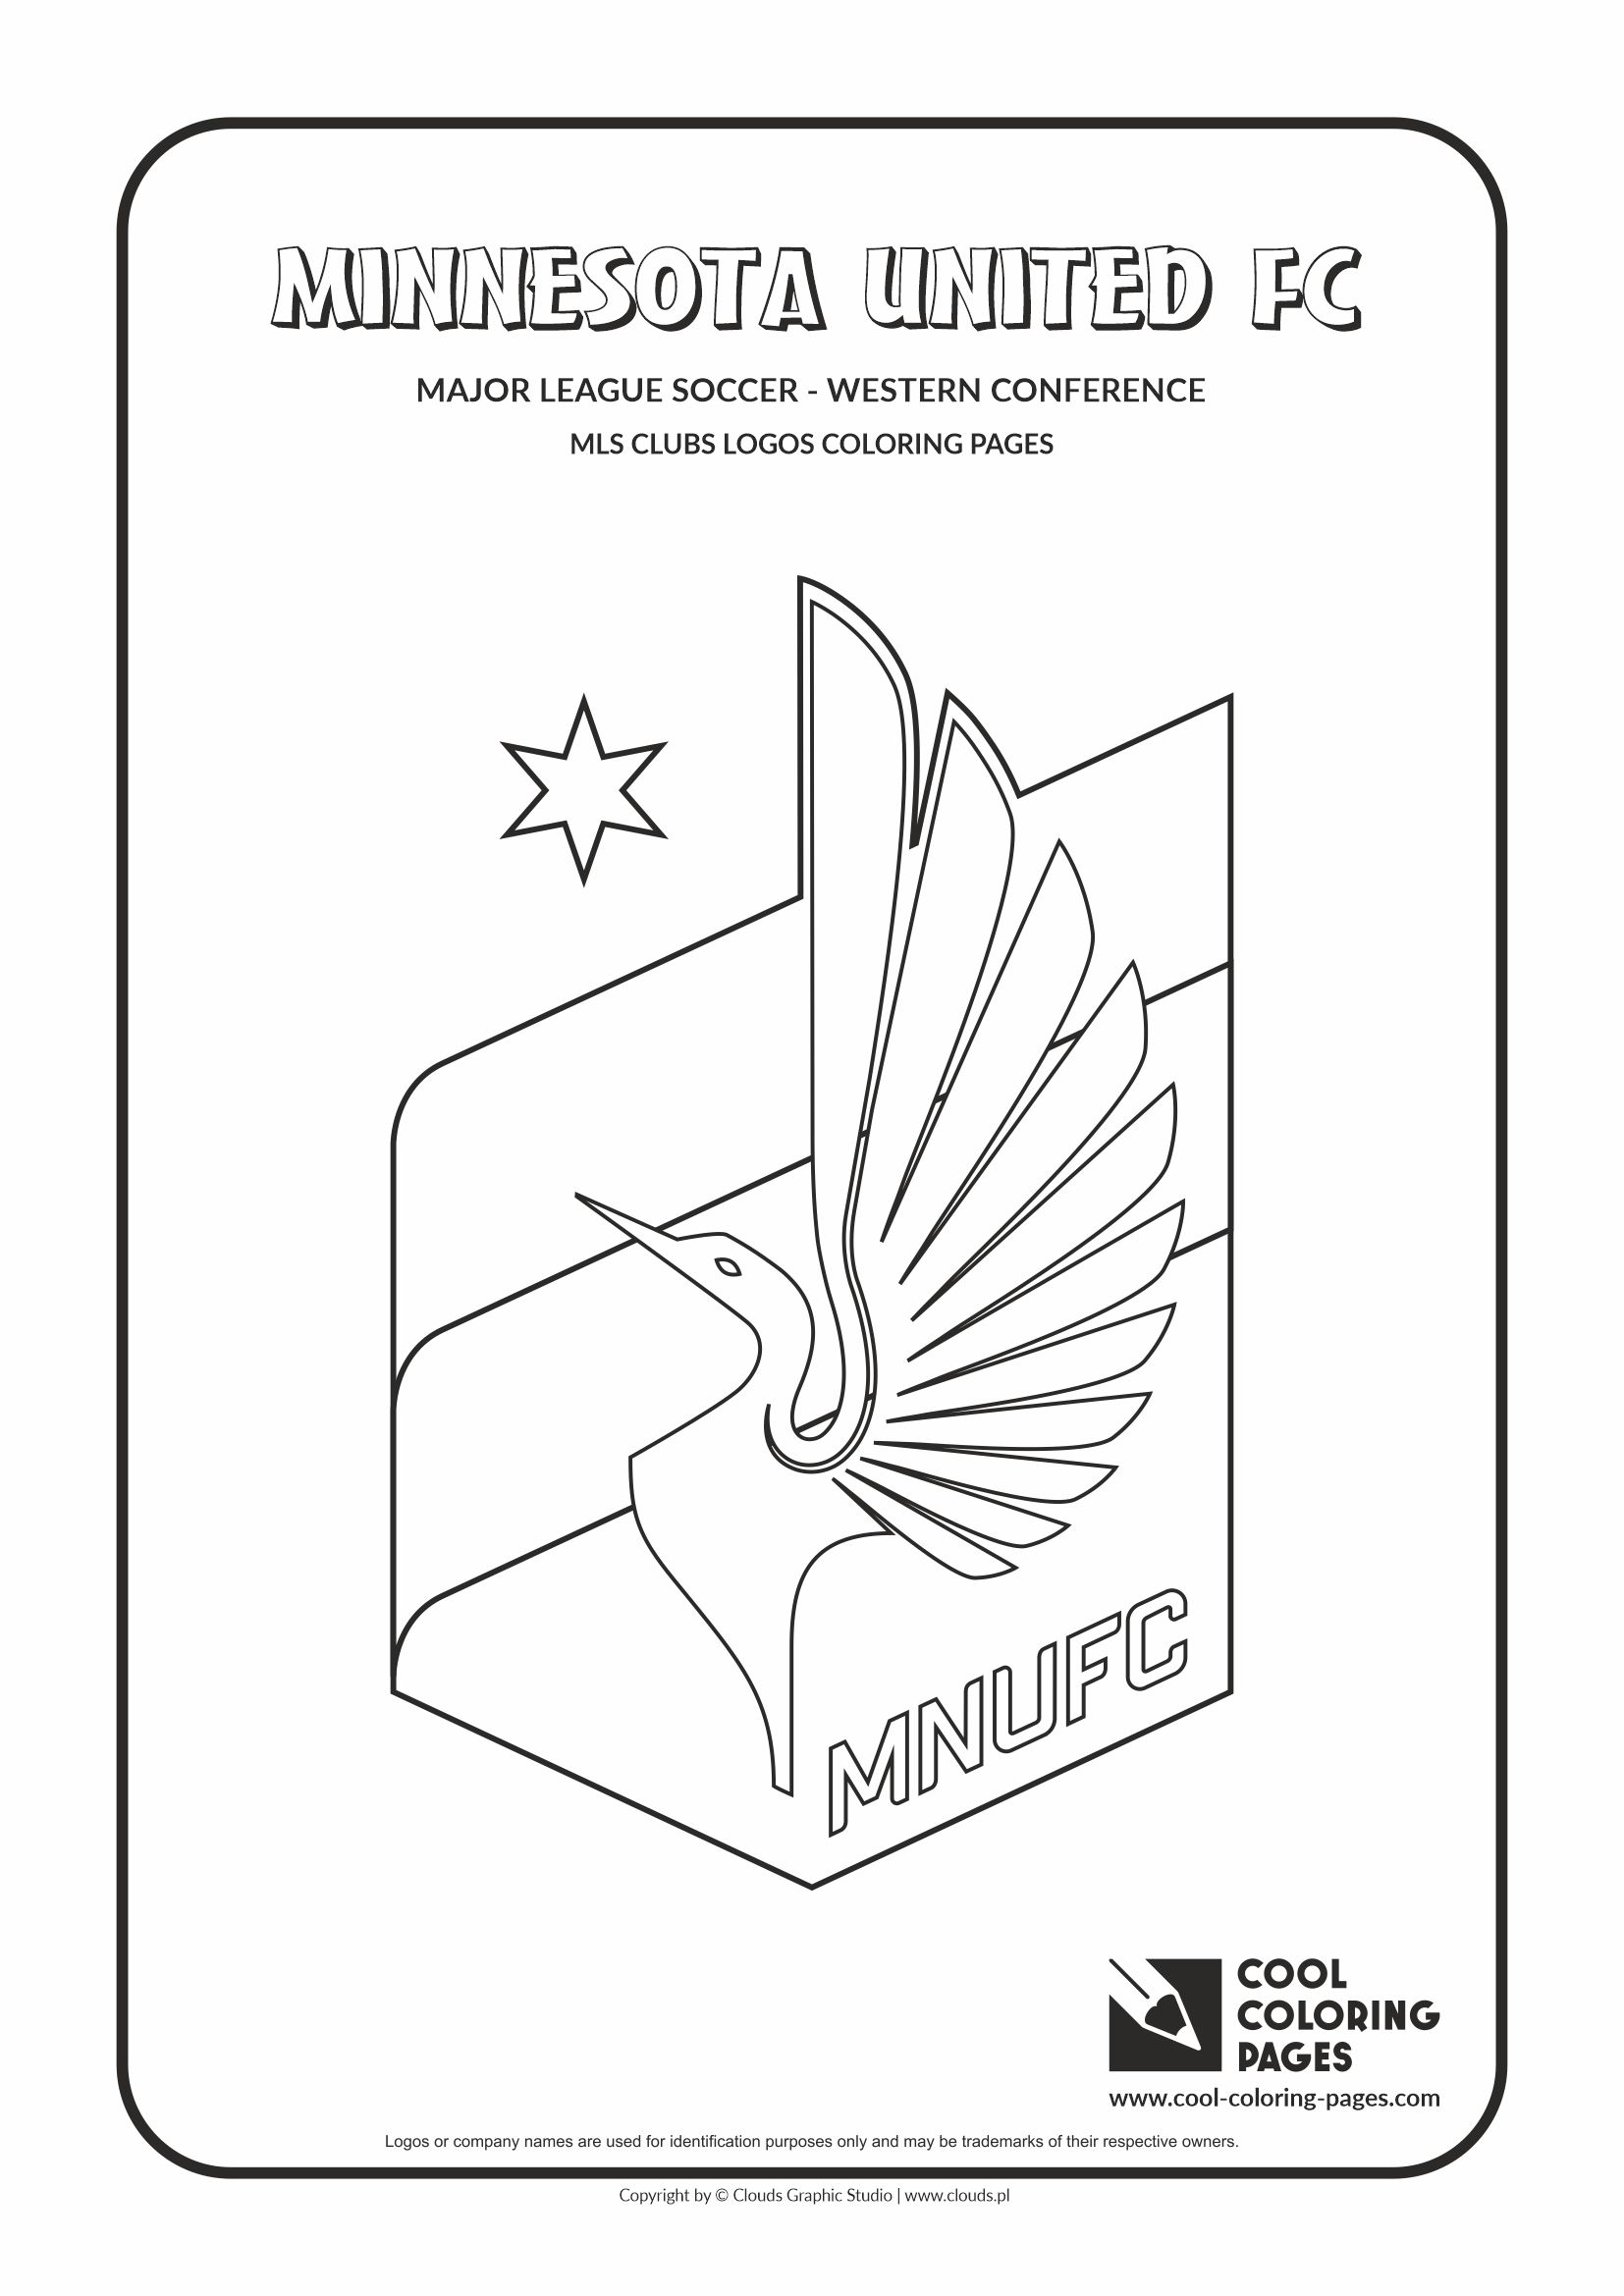 Cool Coloring Pages – MLS clubs logos - Minnesota United FC